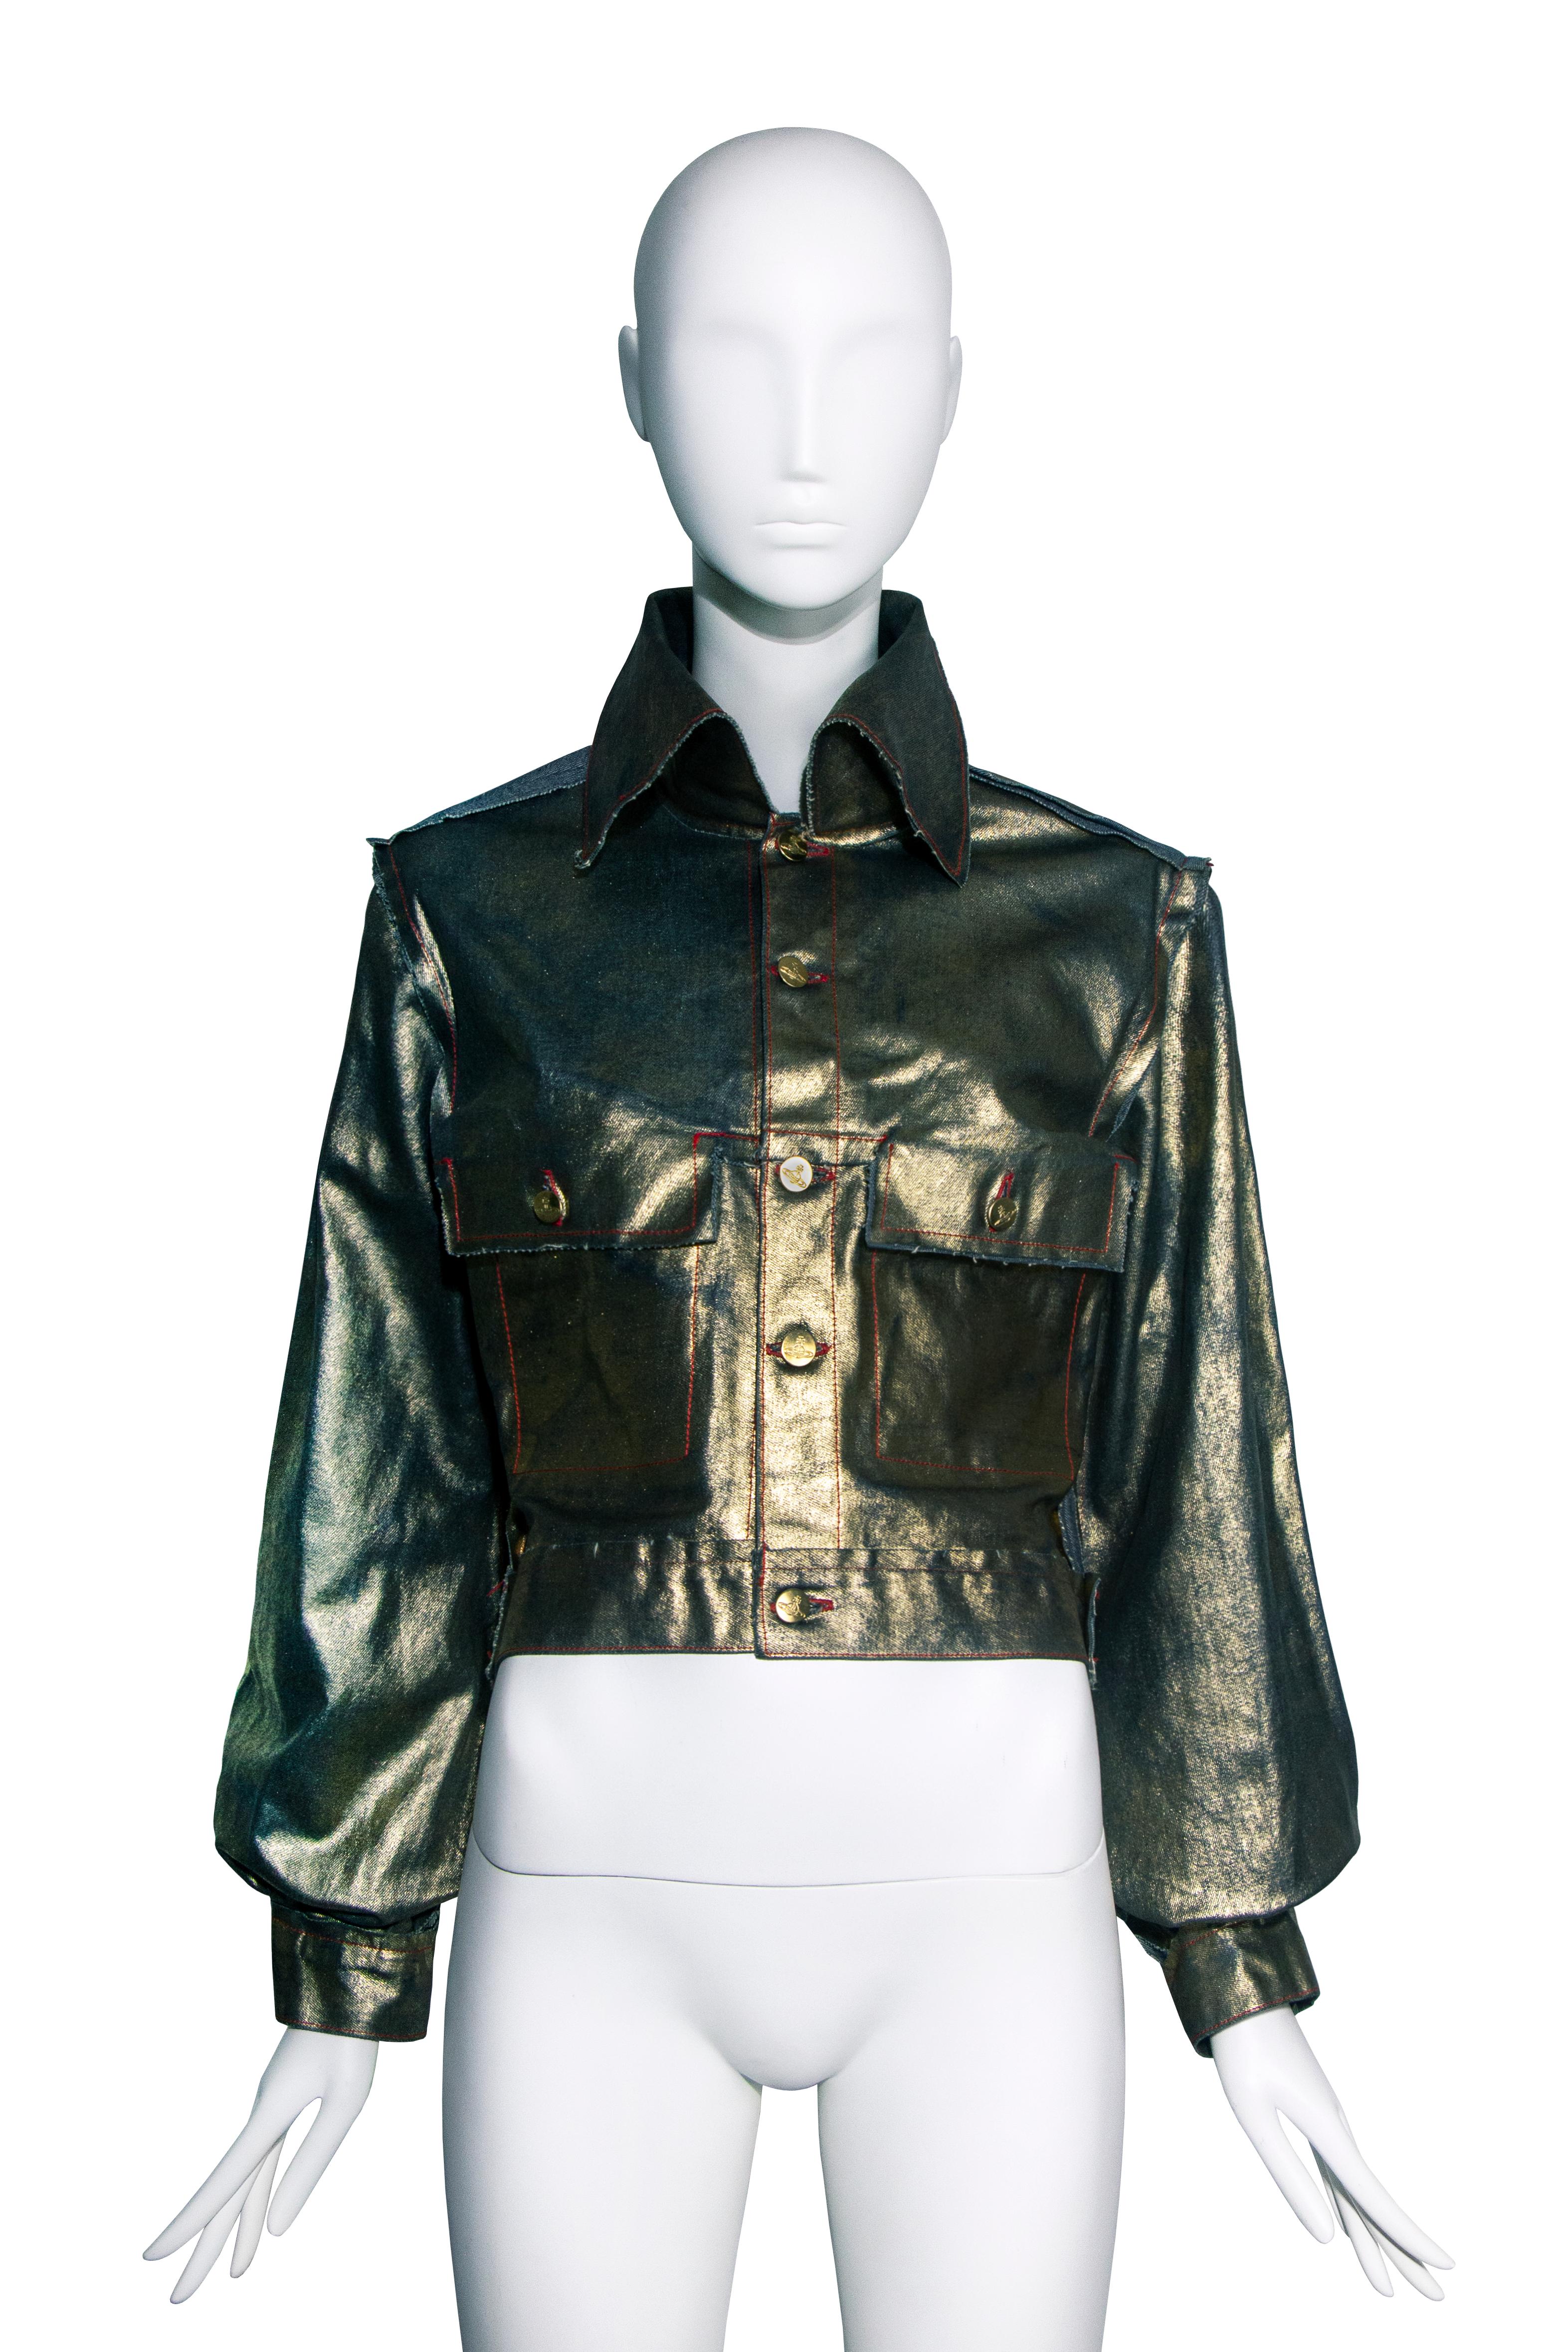  Vivienne Westwood 'Grand Hotel' metallic gold painted denim jacket, ss 1993 In Good Condition For Sale In Melbourne, AU